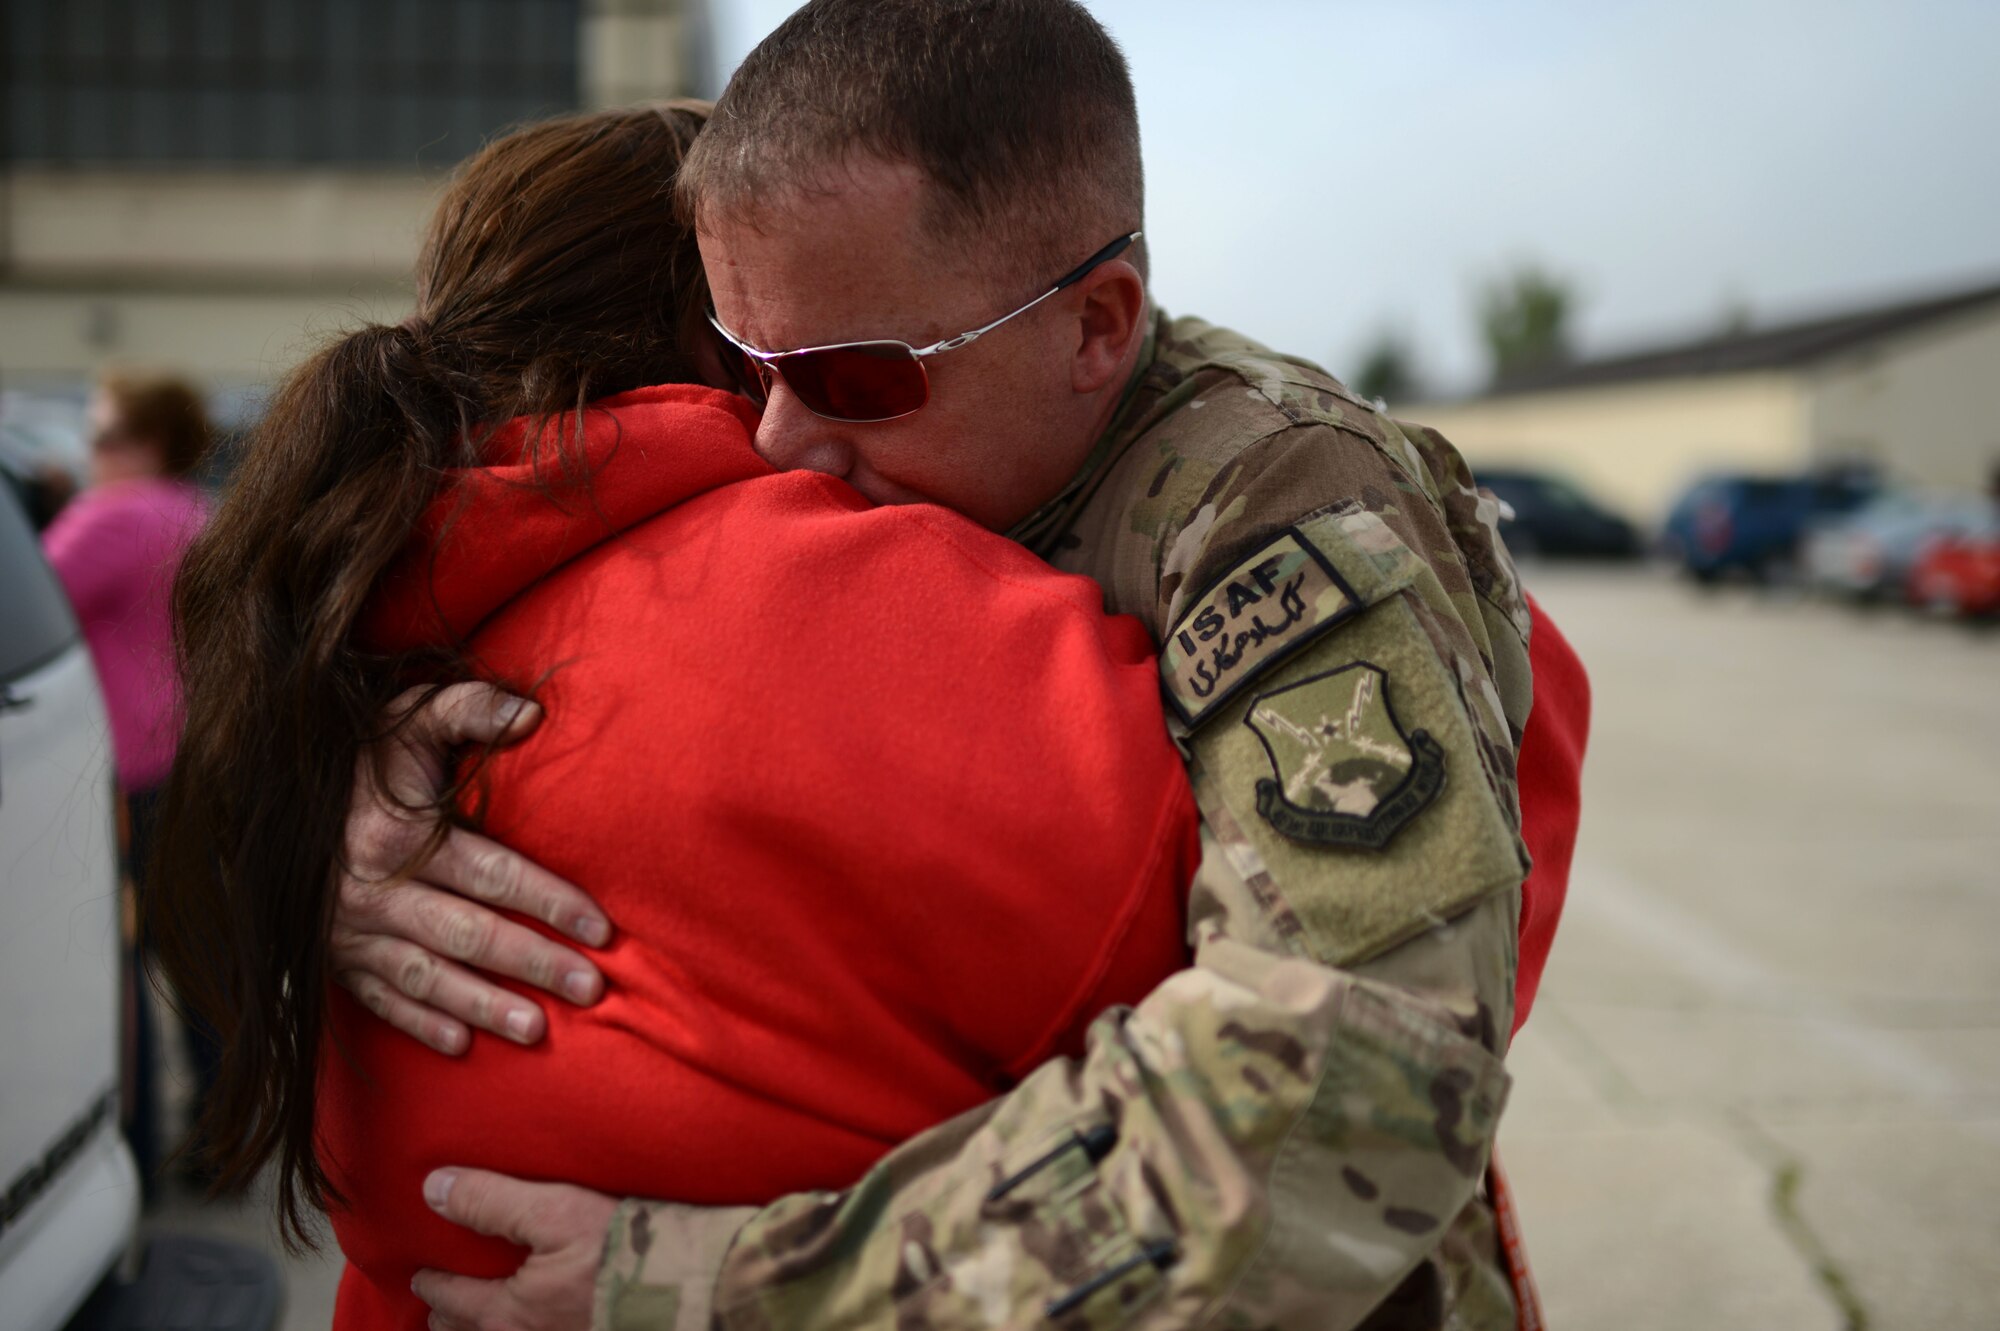 SPANGDAHLEM AIR BASE, Germany – Julia Martel hugs her husband, U.S. Air Force Master Sgt. Joseph Martell, 480th Aircraft Maintenance Unit lead production superintendent from Ocala, Fla., after returning from a deployment Sept. 21, 2013, to Southwest Asia in support of Operation Enduring Freedom. The men and women of the 480th AMU deployed with the specific goal of delivering safe, reliable, airworthy, combat-ready aircraft to provide close air support to friendly ground forces. (U.S. Air Force photo by Airman 1st Class Gustavo Castillo/Released)